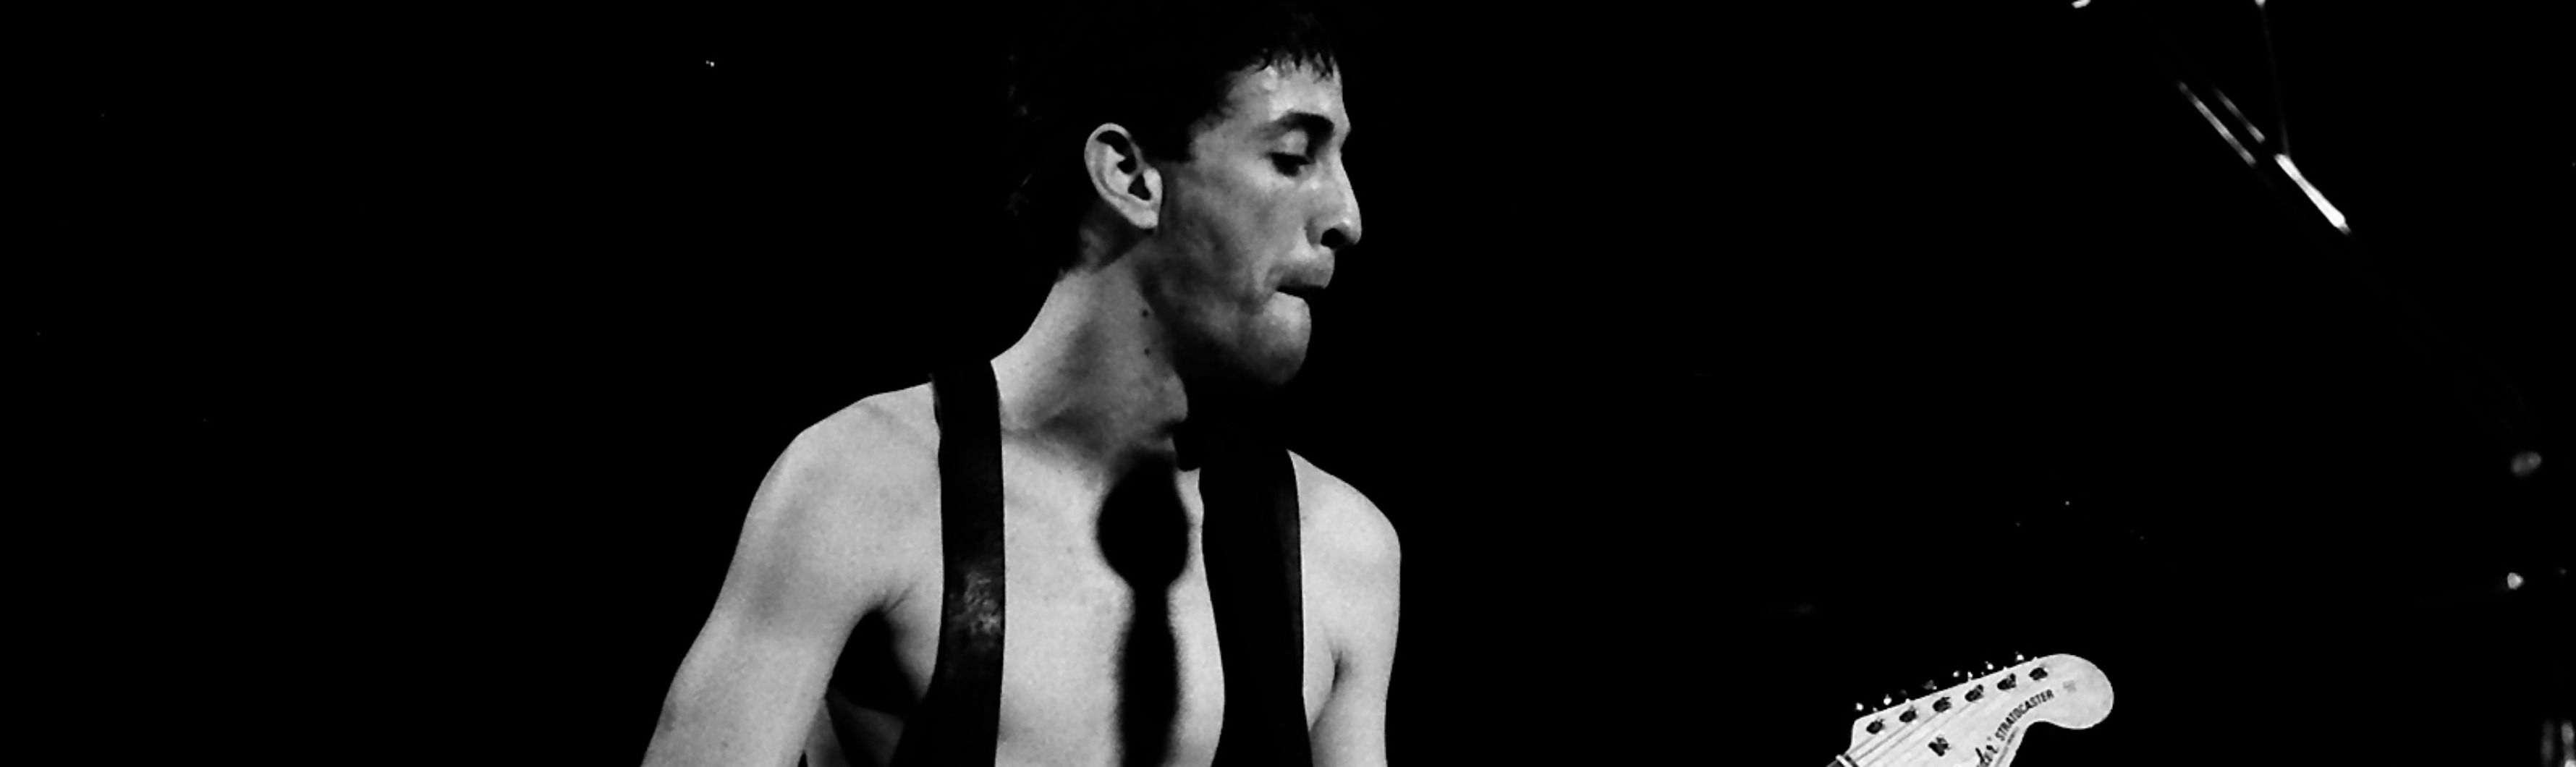 Remembering Hillel Slovak, the Forgotten Founder of the Red Chili Peppers - Tablet Magazine